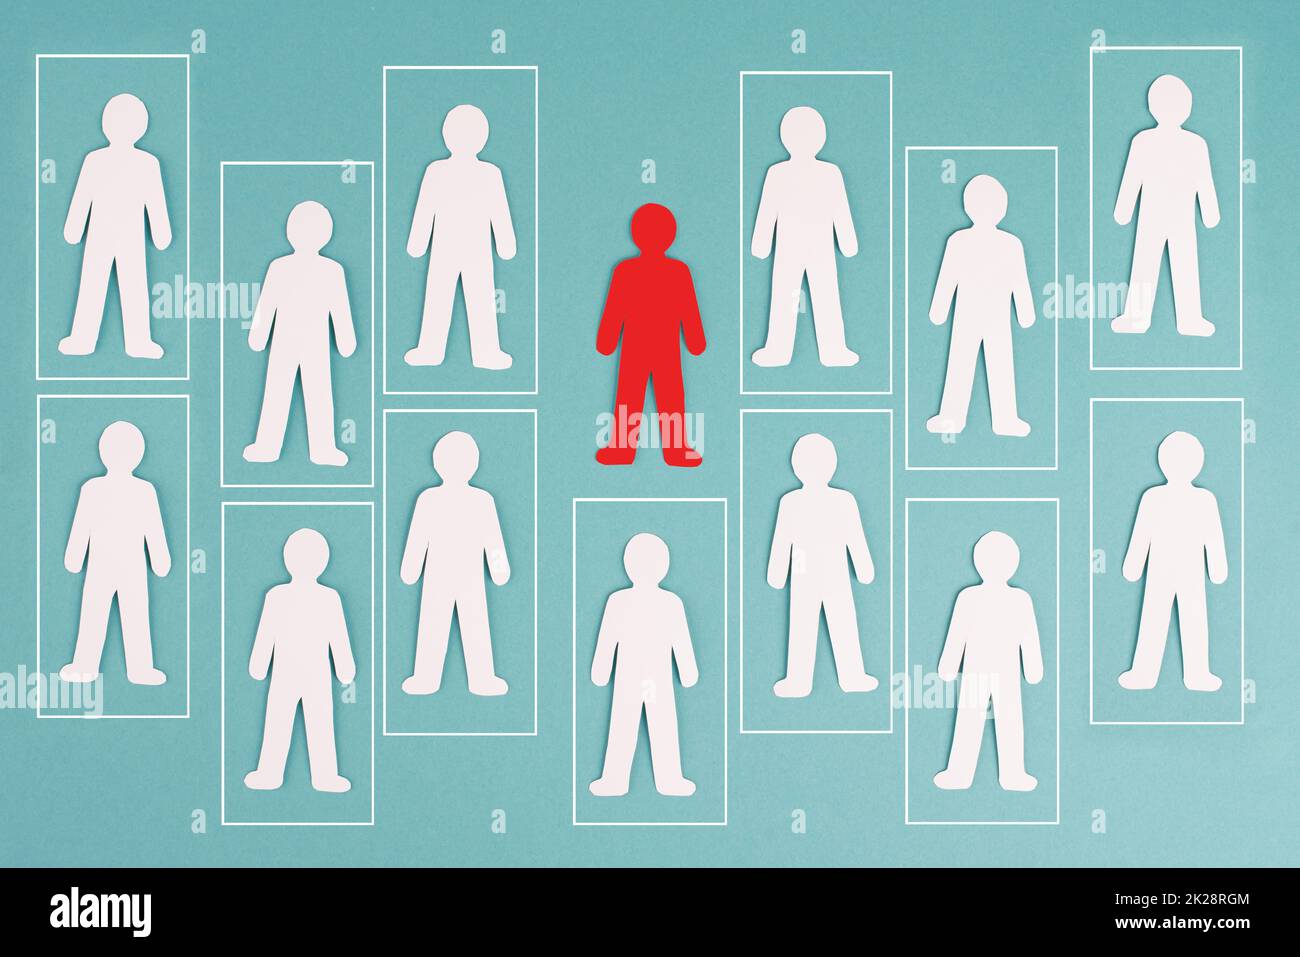 Think outside the box concept, standing out from the crowd, group of people in boxes, one red man has individuality Stock Photo